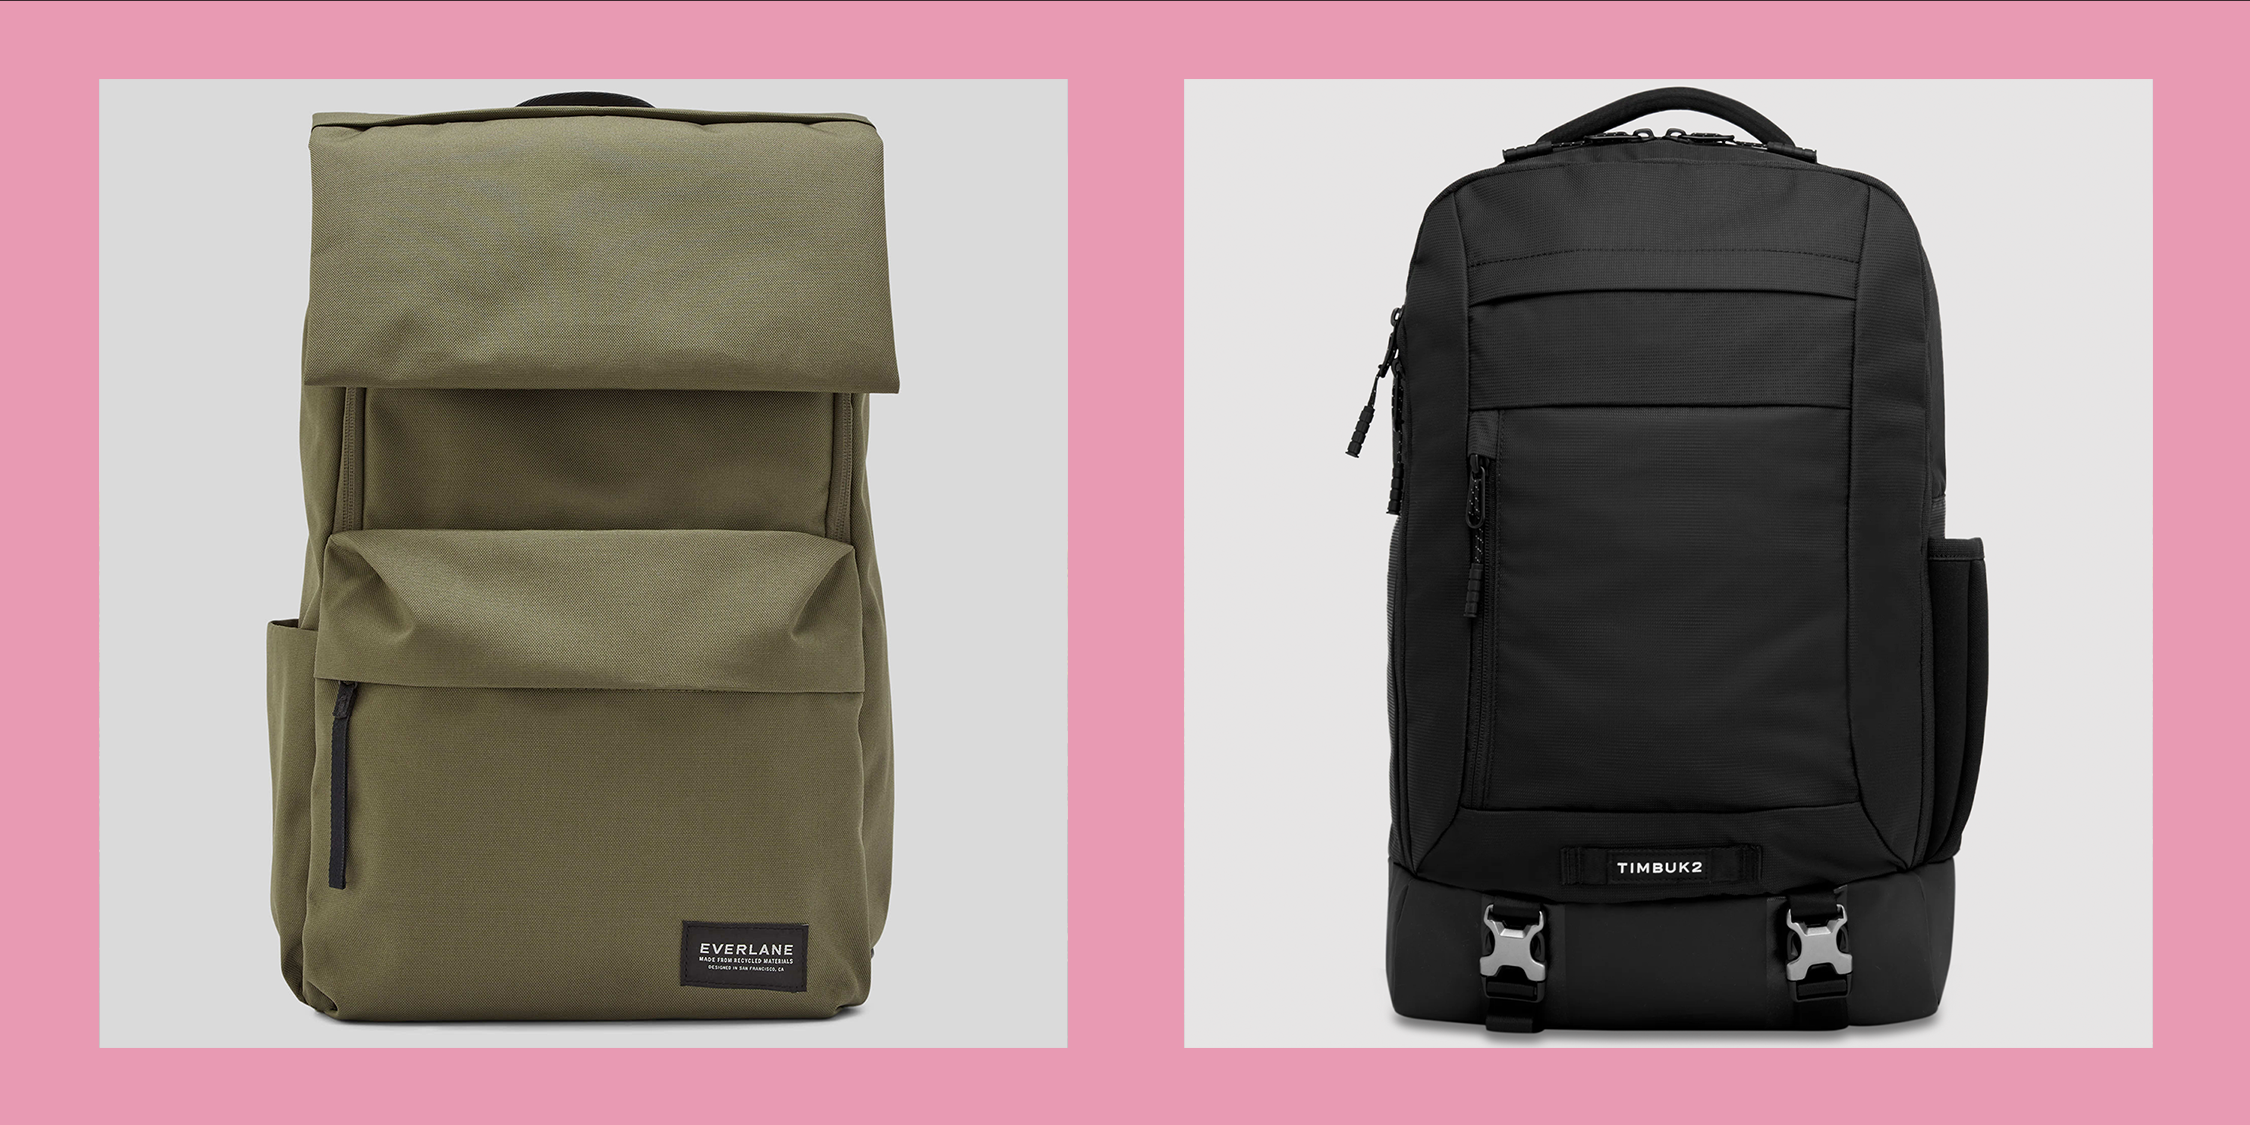 This 'Spacious' Carry-On Travel Backpack Is $37 at